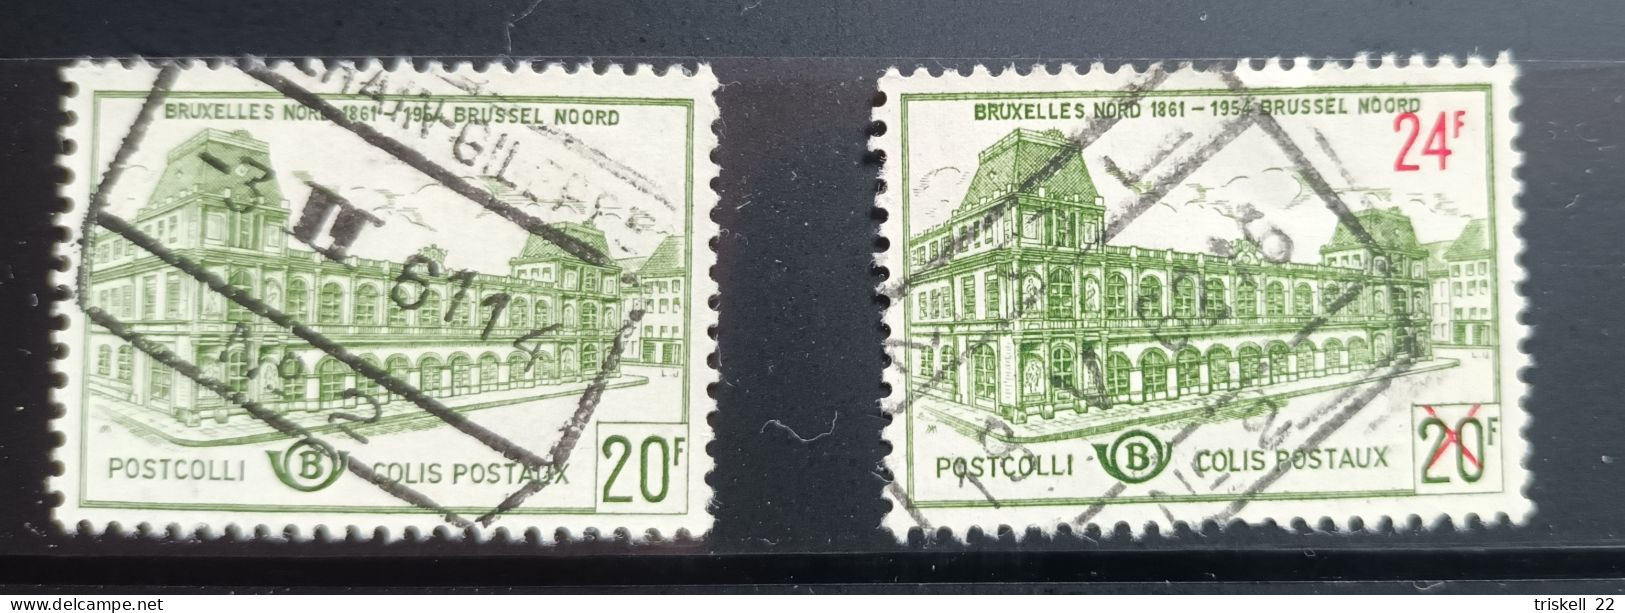 2 Timbres Colis Postaux Bruxelles Nord 1861-1954 - Used